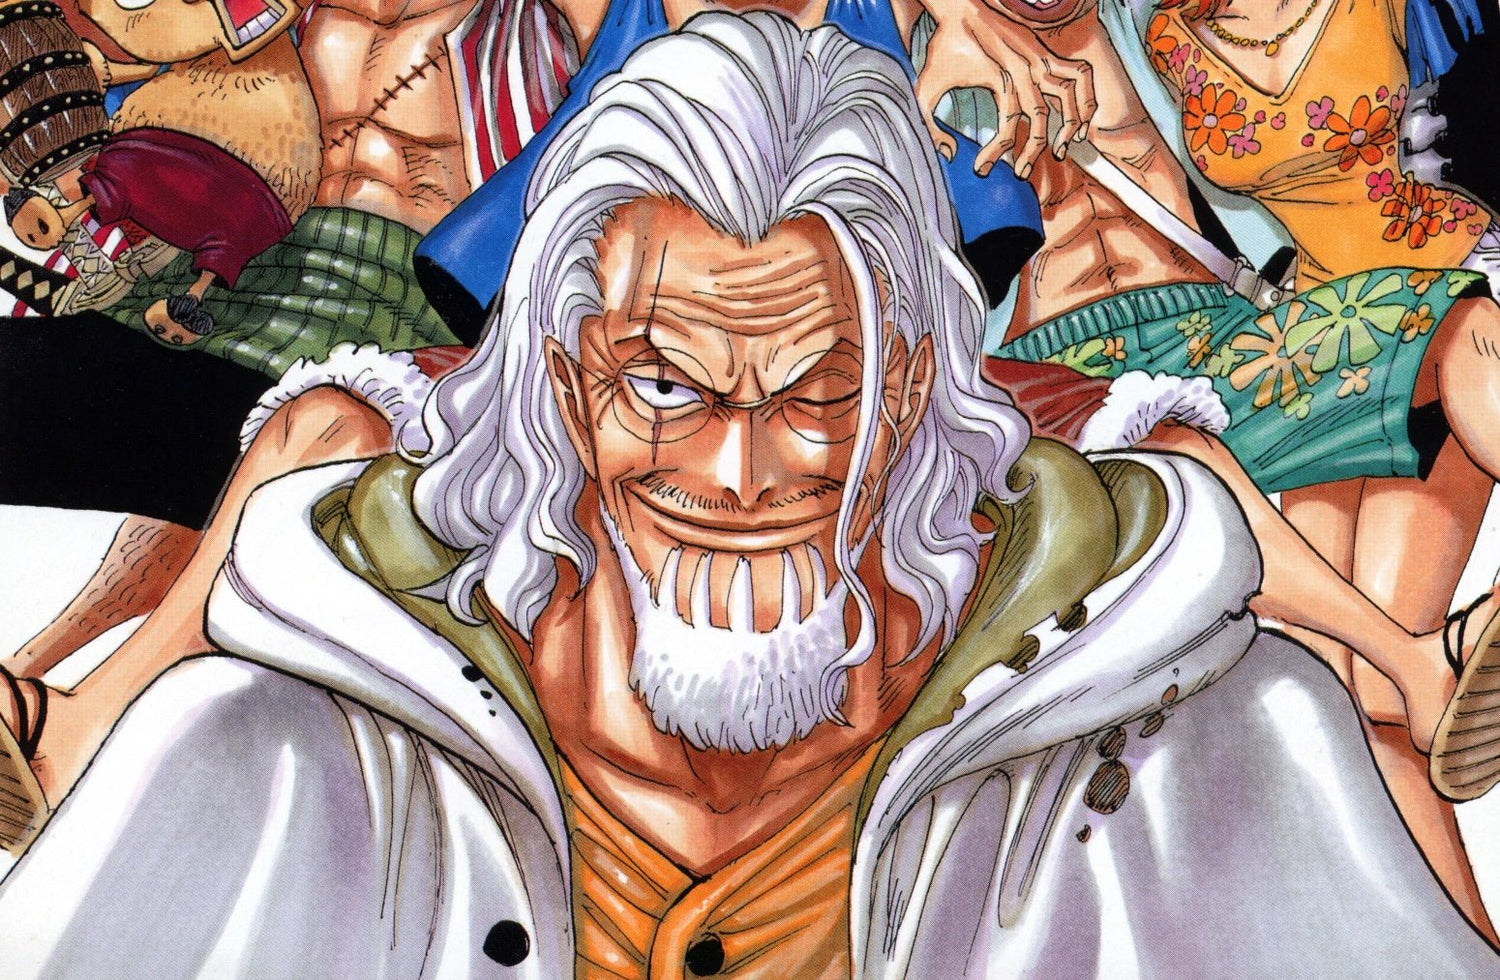 Silvers Rayleigh from One Piece: The Dark King’s Legacy and Mysteries - Seakoff